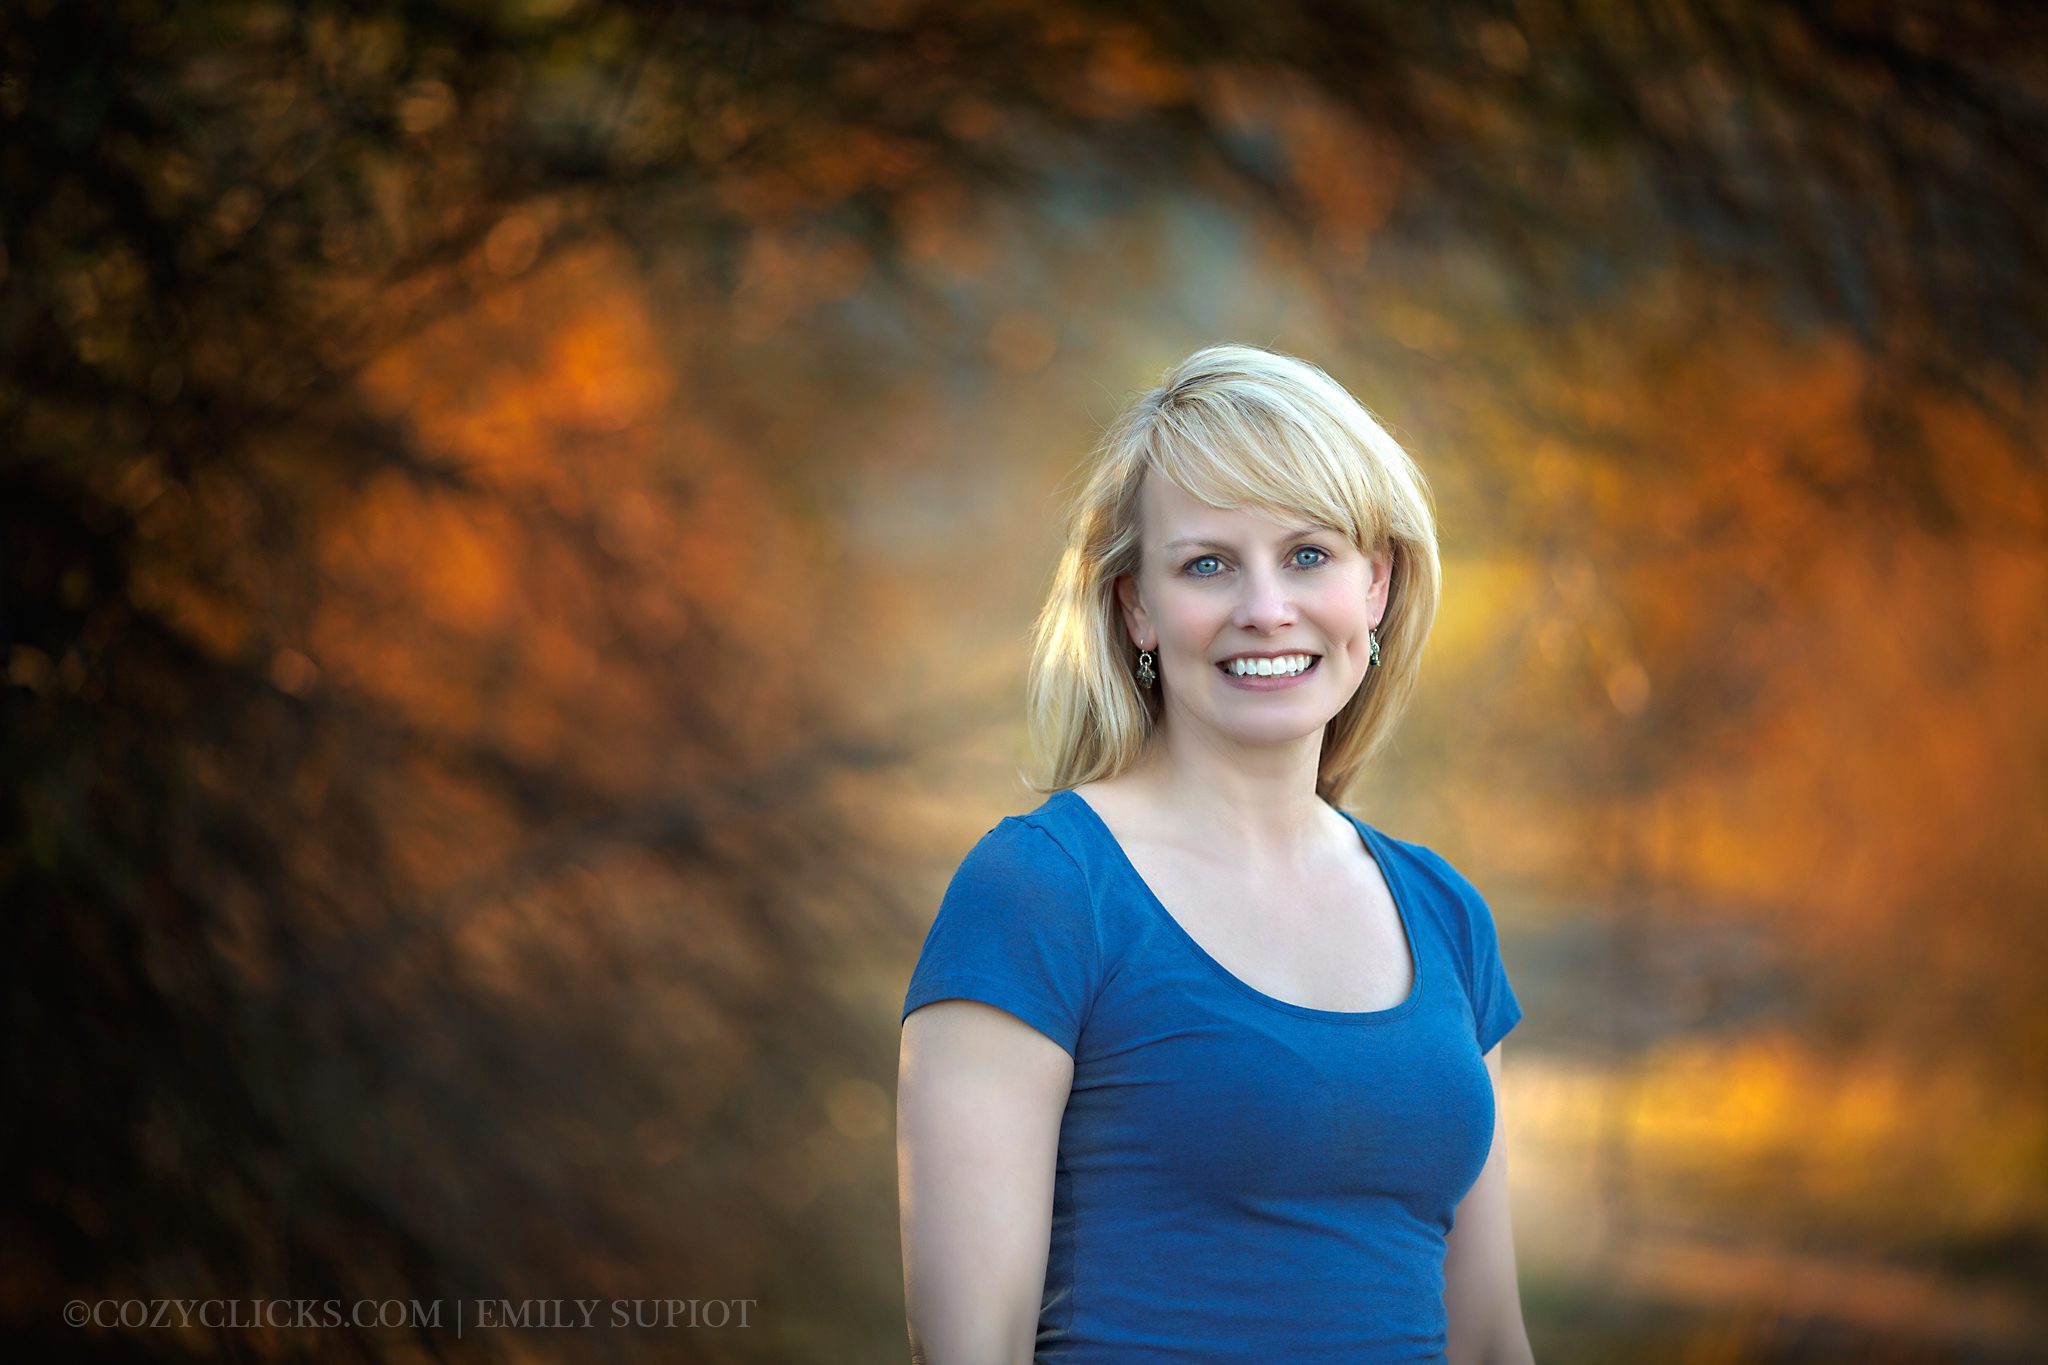 Gorgeous business portrait near a tree outdoors at sunset